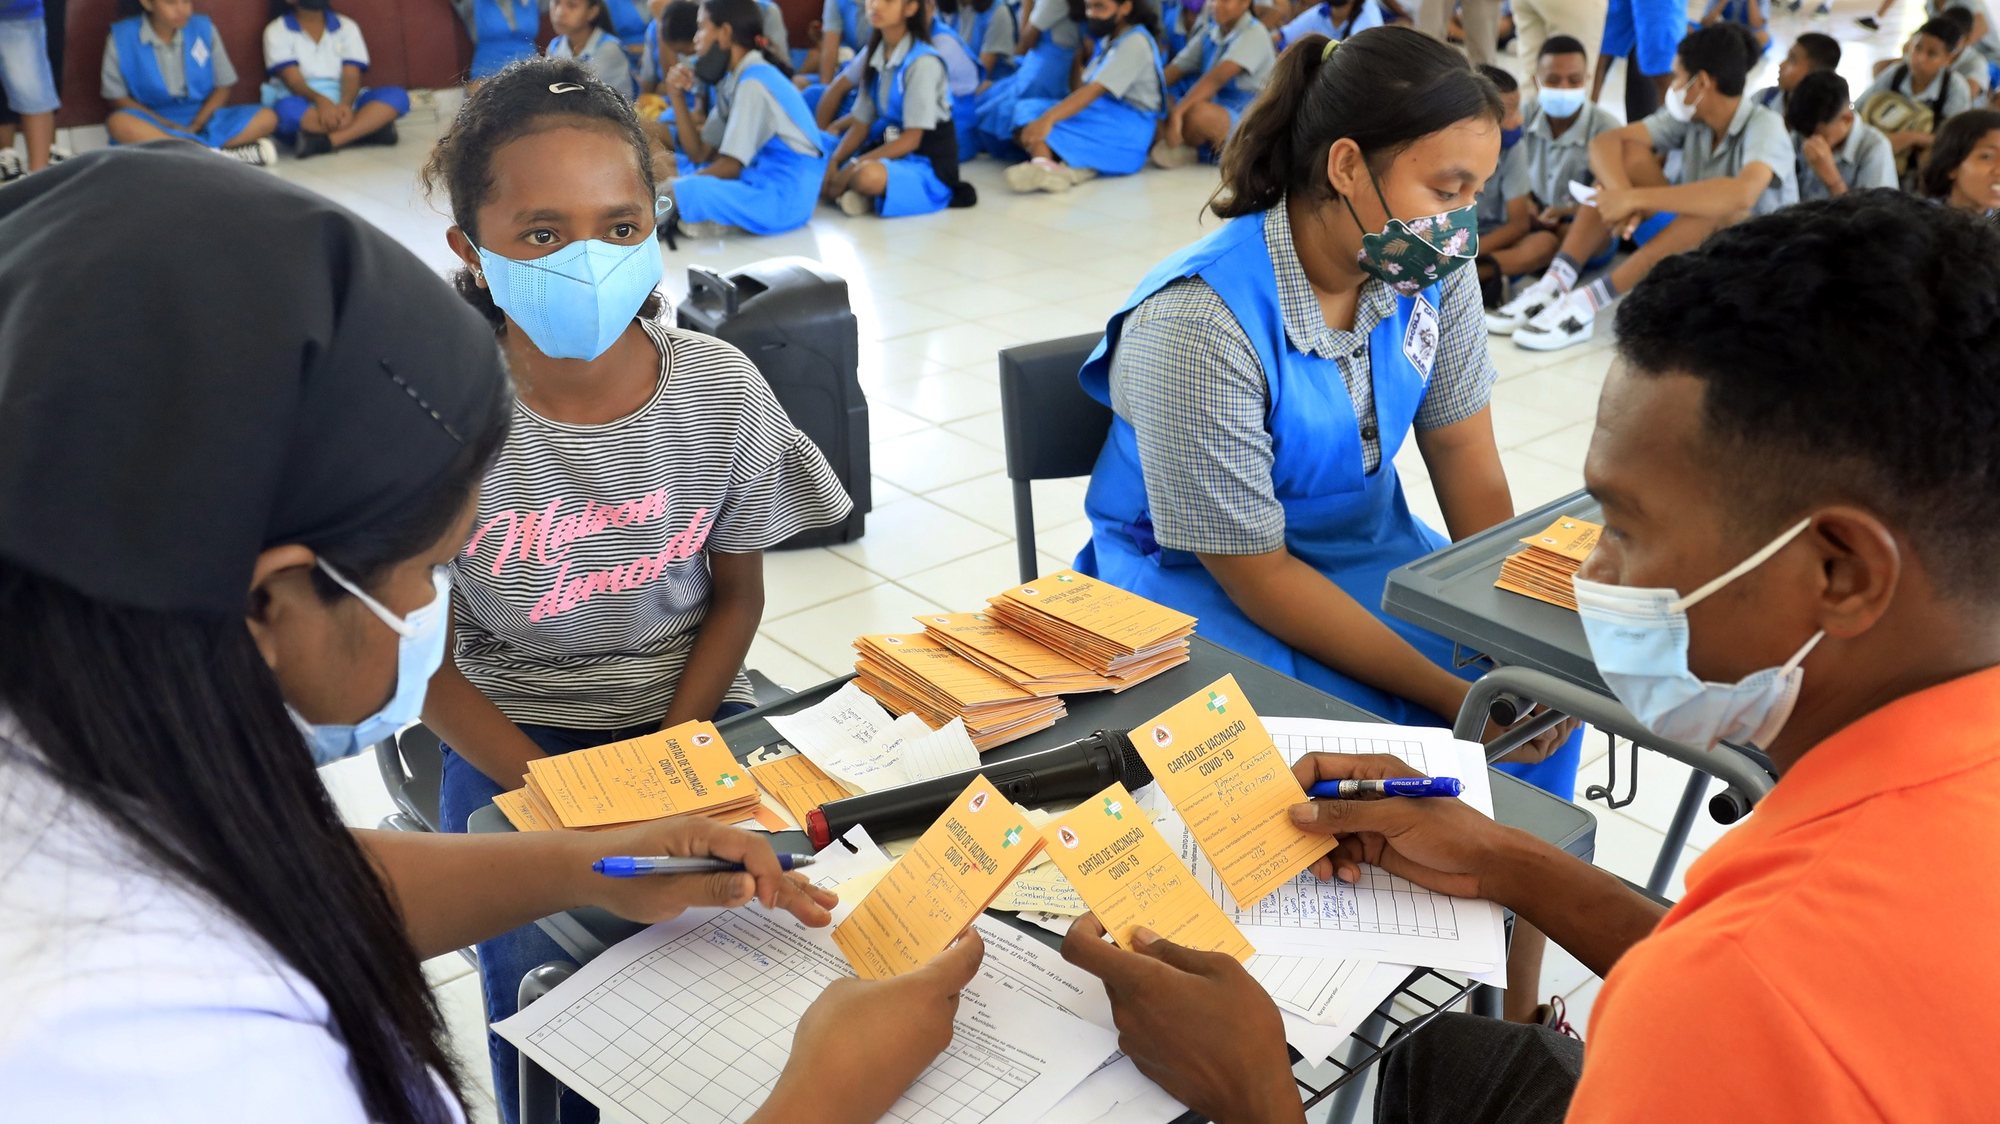 epa09612060 Students register for a Pfizer COVID-19 vaccine injection during a vaccination drive for children over twelve years of age in Dili, East Timor, also known as Timor Leste, 30 November 2021. East Timor has recorded more than 19,800 coronavirus disease (COVID-19) cases since the beginning of the pandemic.  EPA/ANTONIO DASIPARU